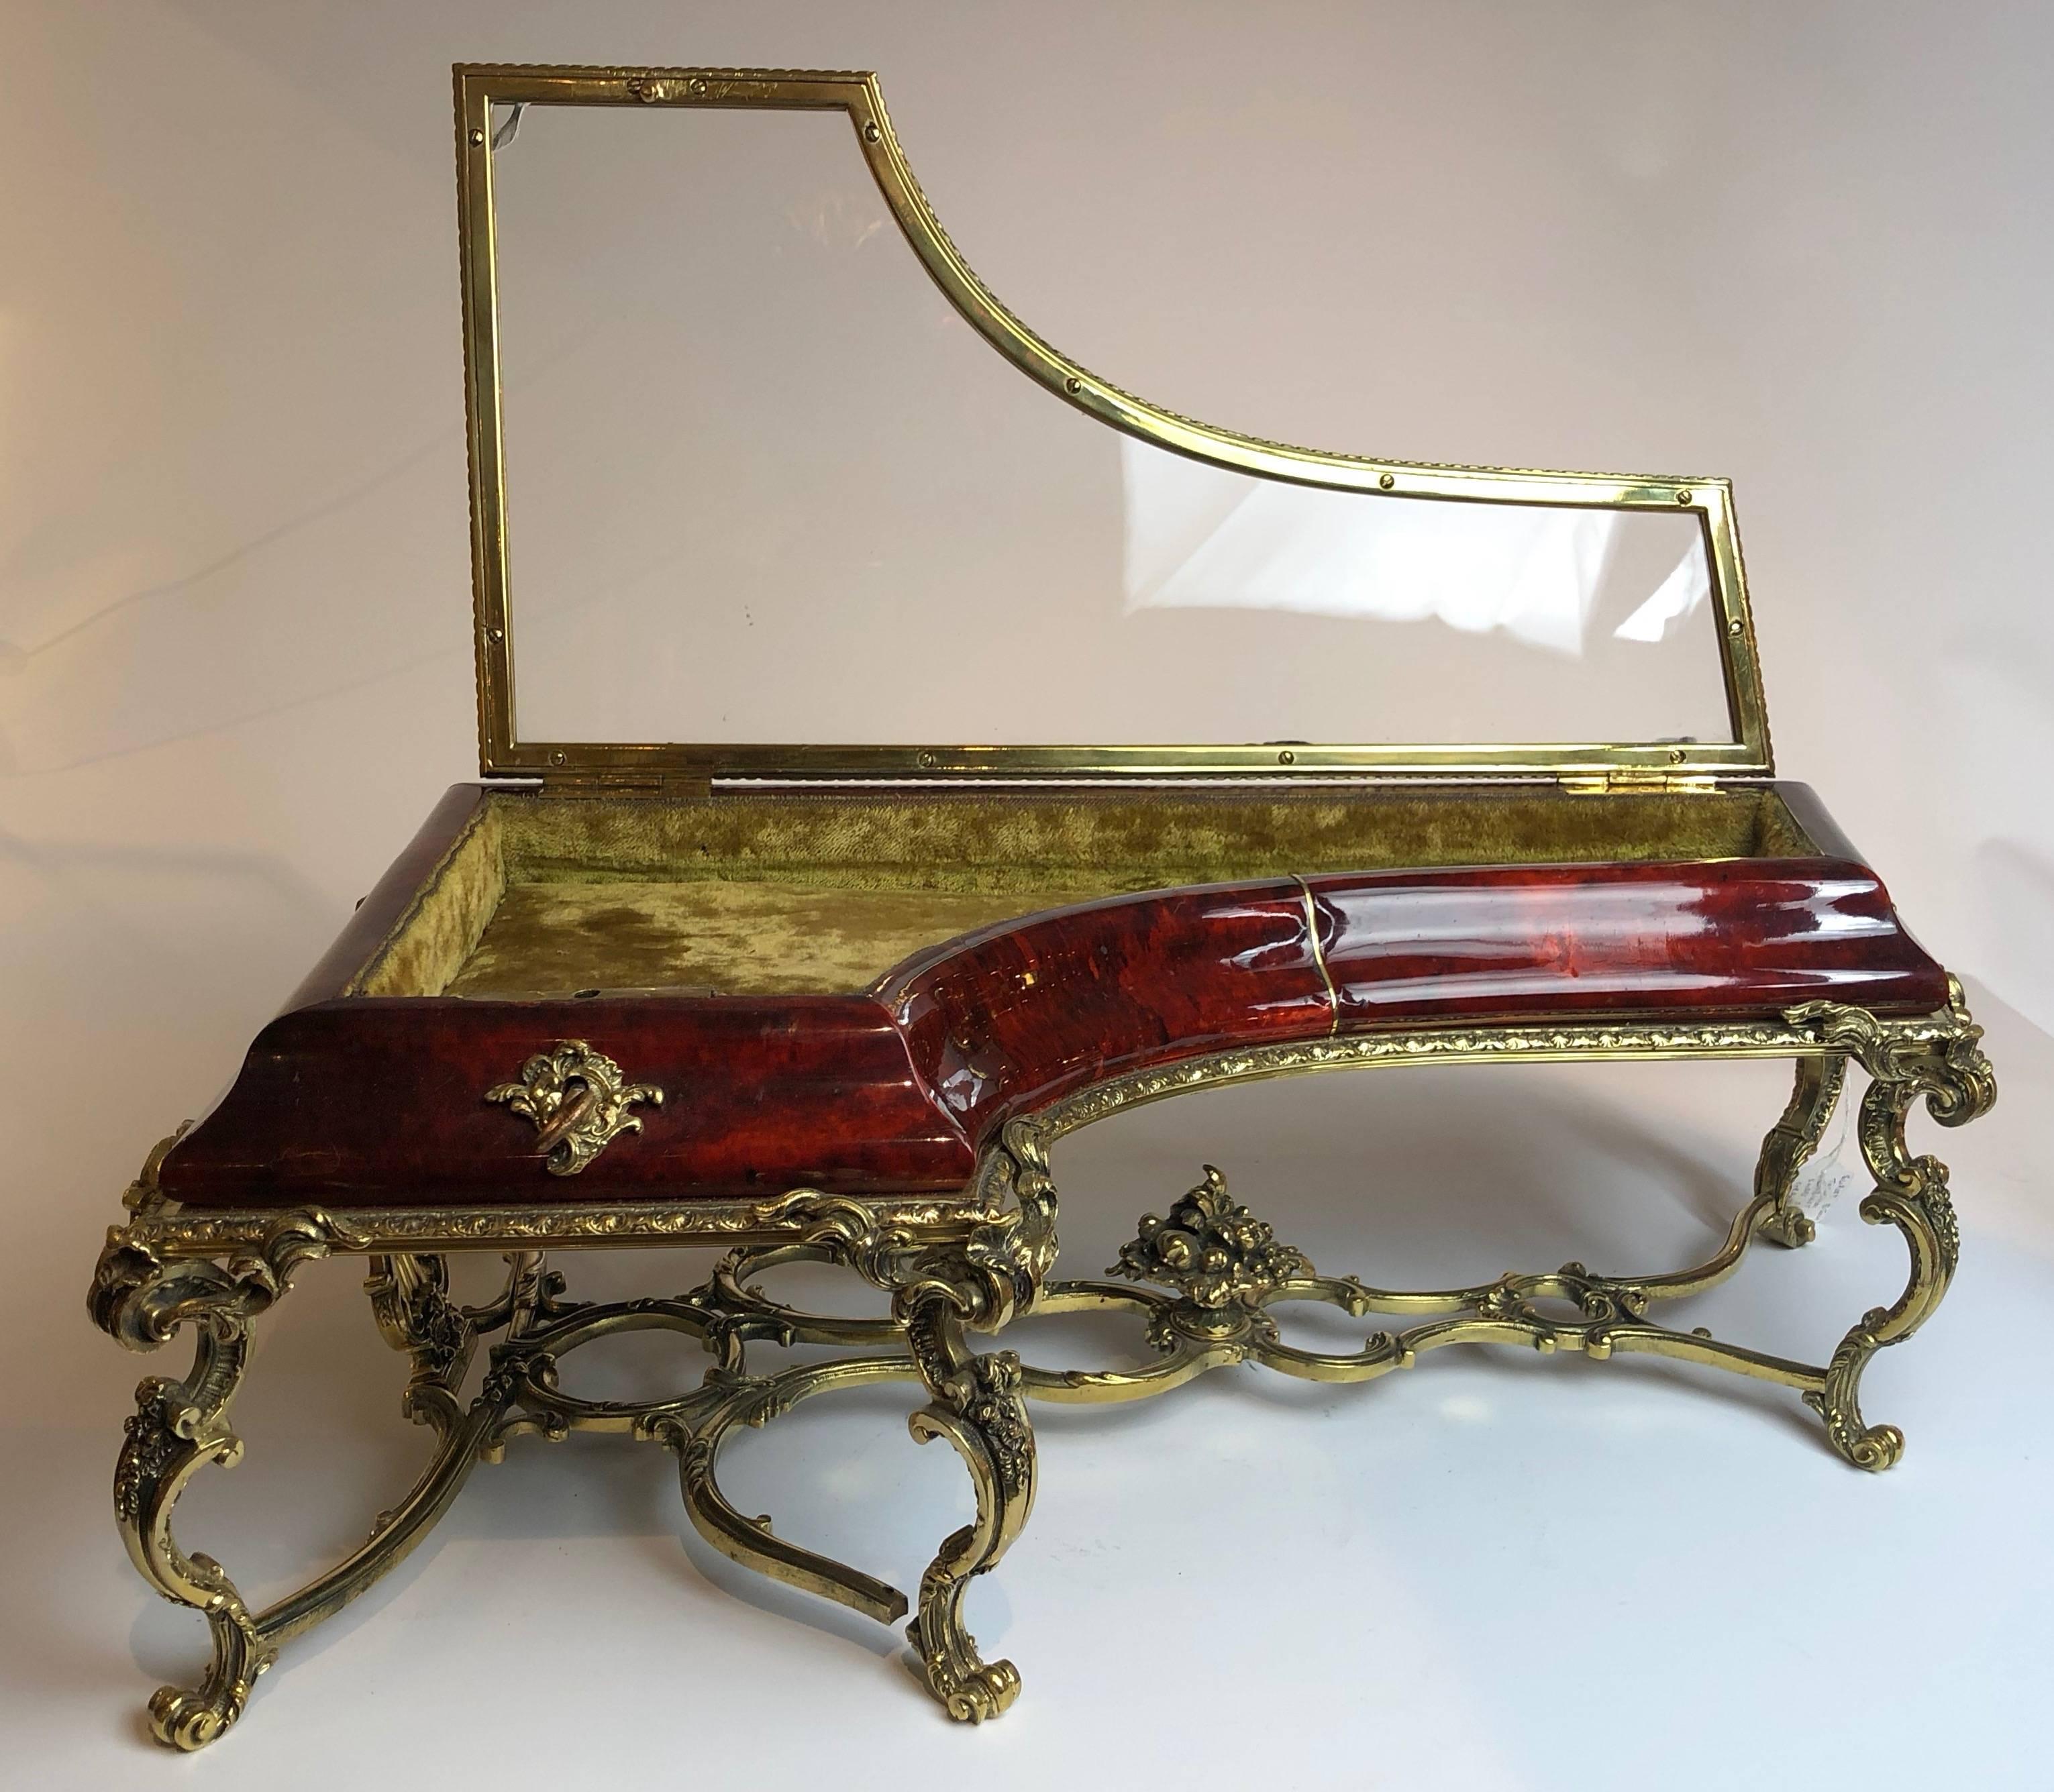 Grand Tour Faux Tortoiseshell and Ormolu Tabletop Vitrine in the Form of a Grand Piano